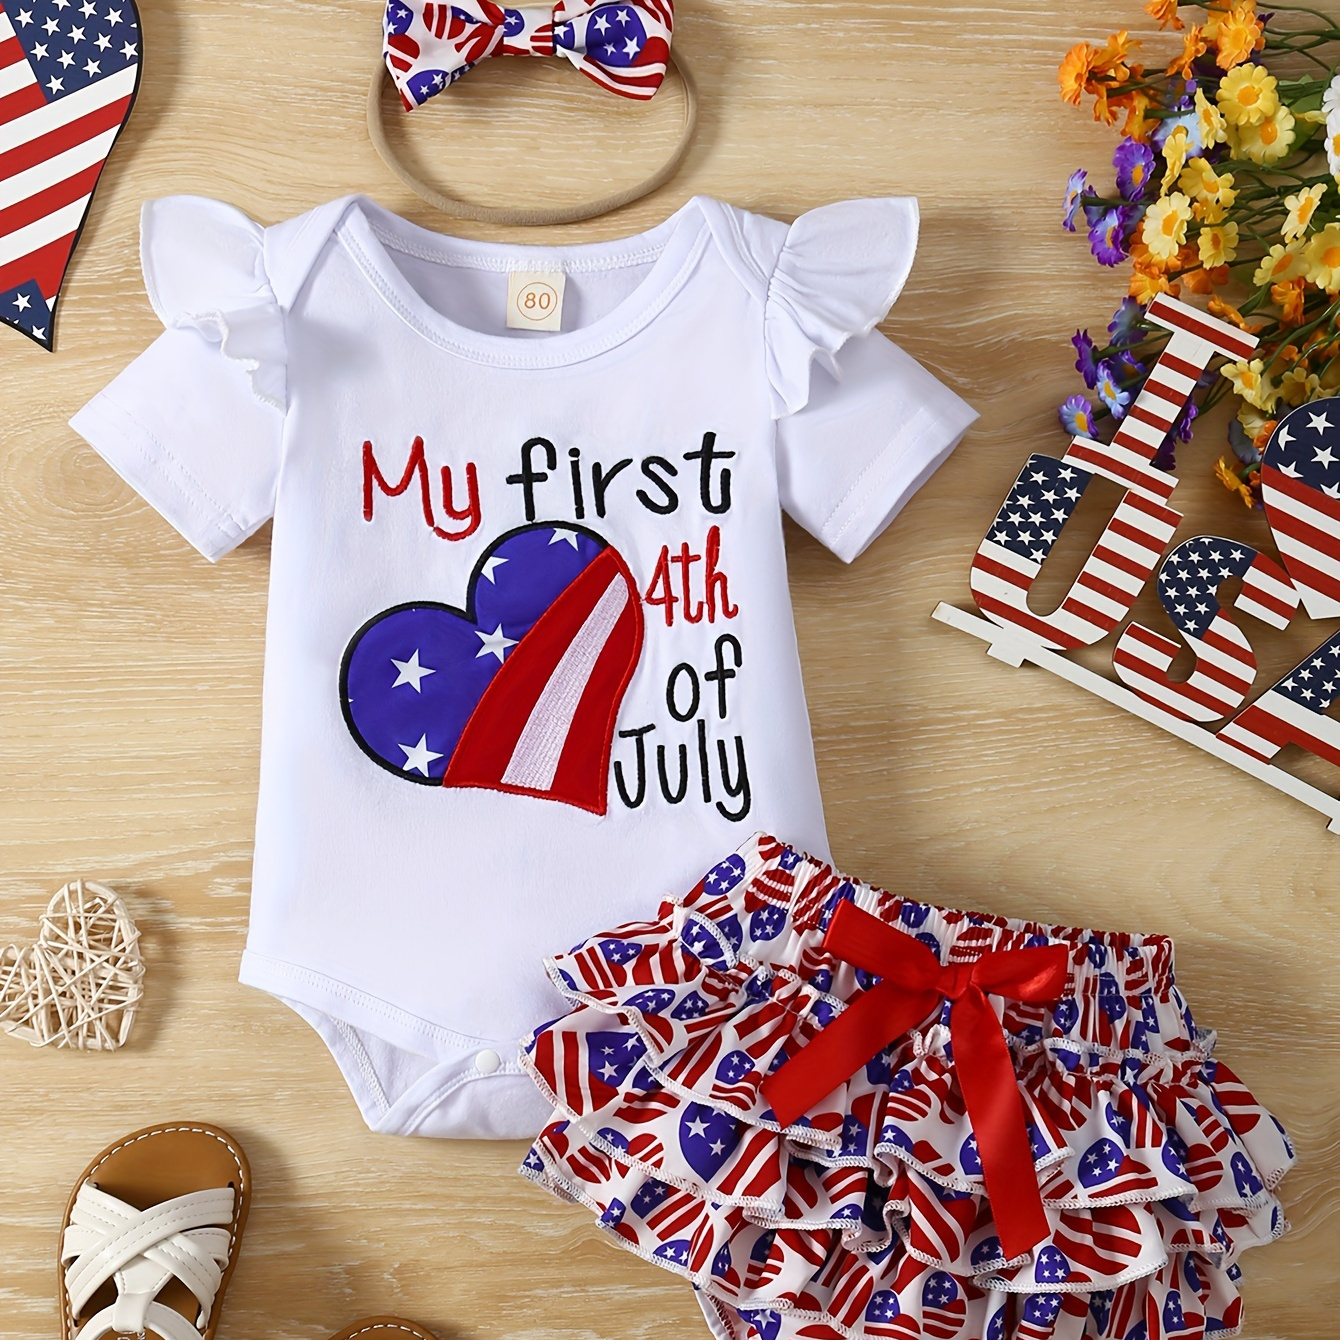 

Baby's "my First 4th Of July" Embroidered 2pcs Summer Outfit, Short Sleeve Onesie & Layered Skirt Set, Toddler & Infant Girl's Clothes